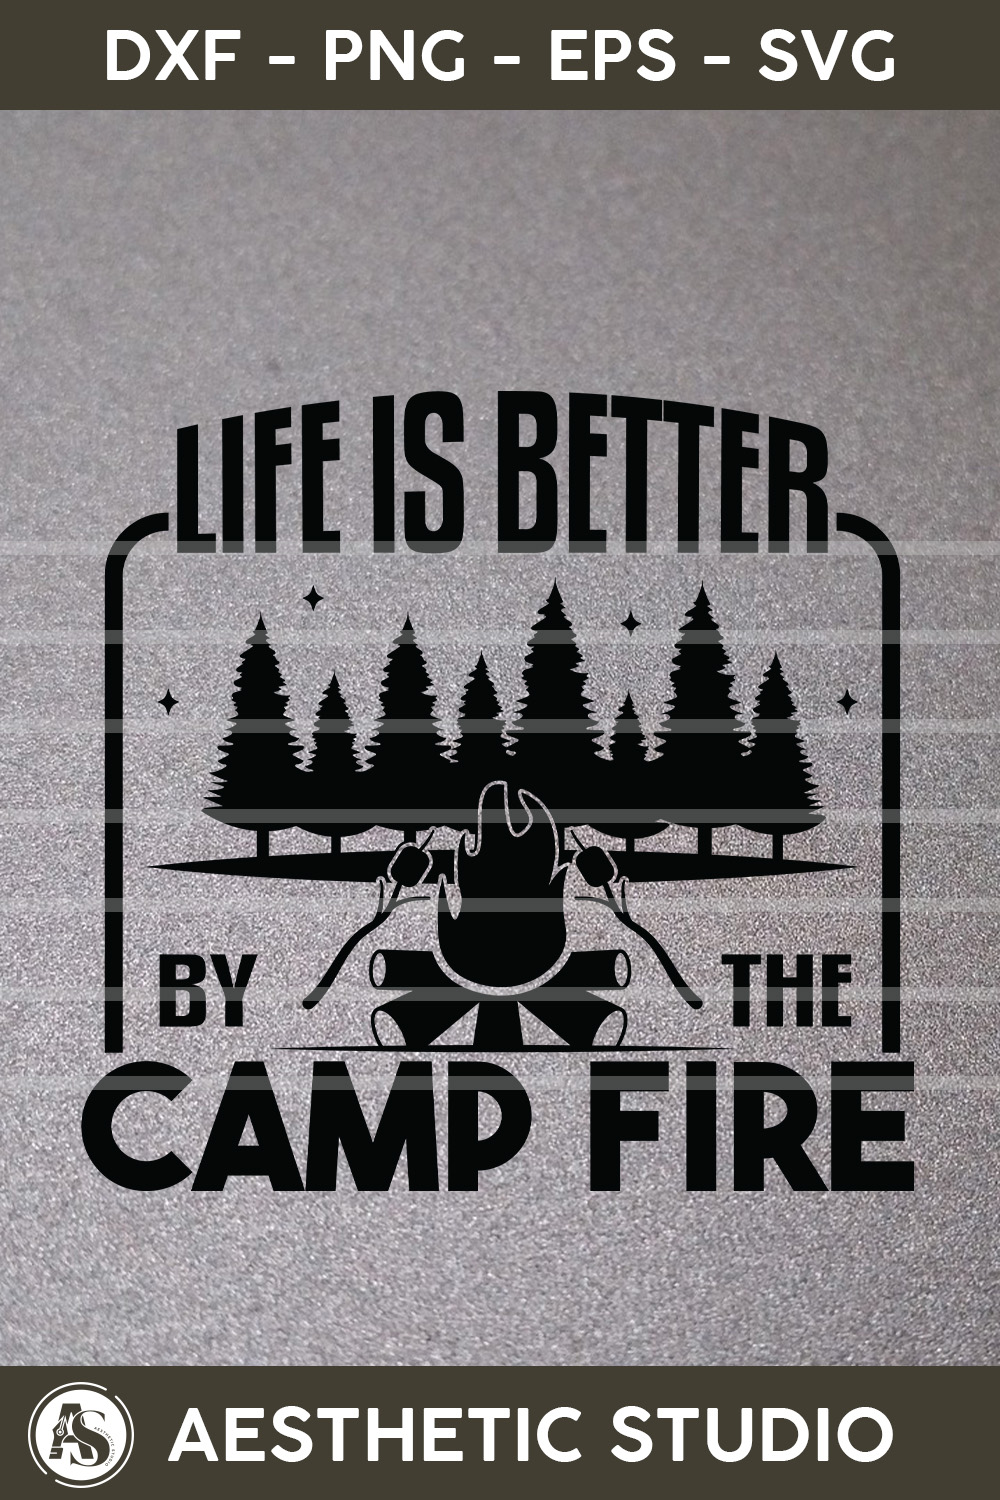 Life Is Better By The Camp Fire, Happy Campers Svg, Camper, Adventure, Camp Life, Camping Svg, Typography, Camping Quotes, Camping Cut File, Funny Camping, Camping T-shirt Design, Svg, Eps, Dxf, Png, Cut file pinterest preview image.